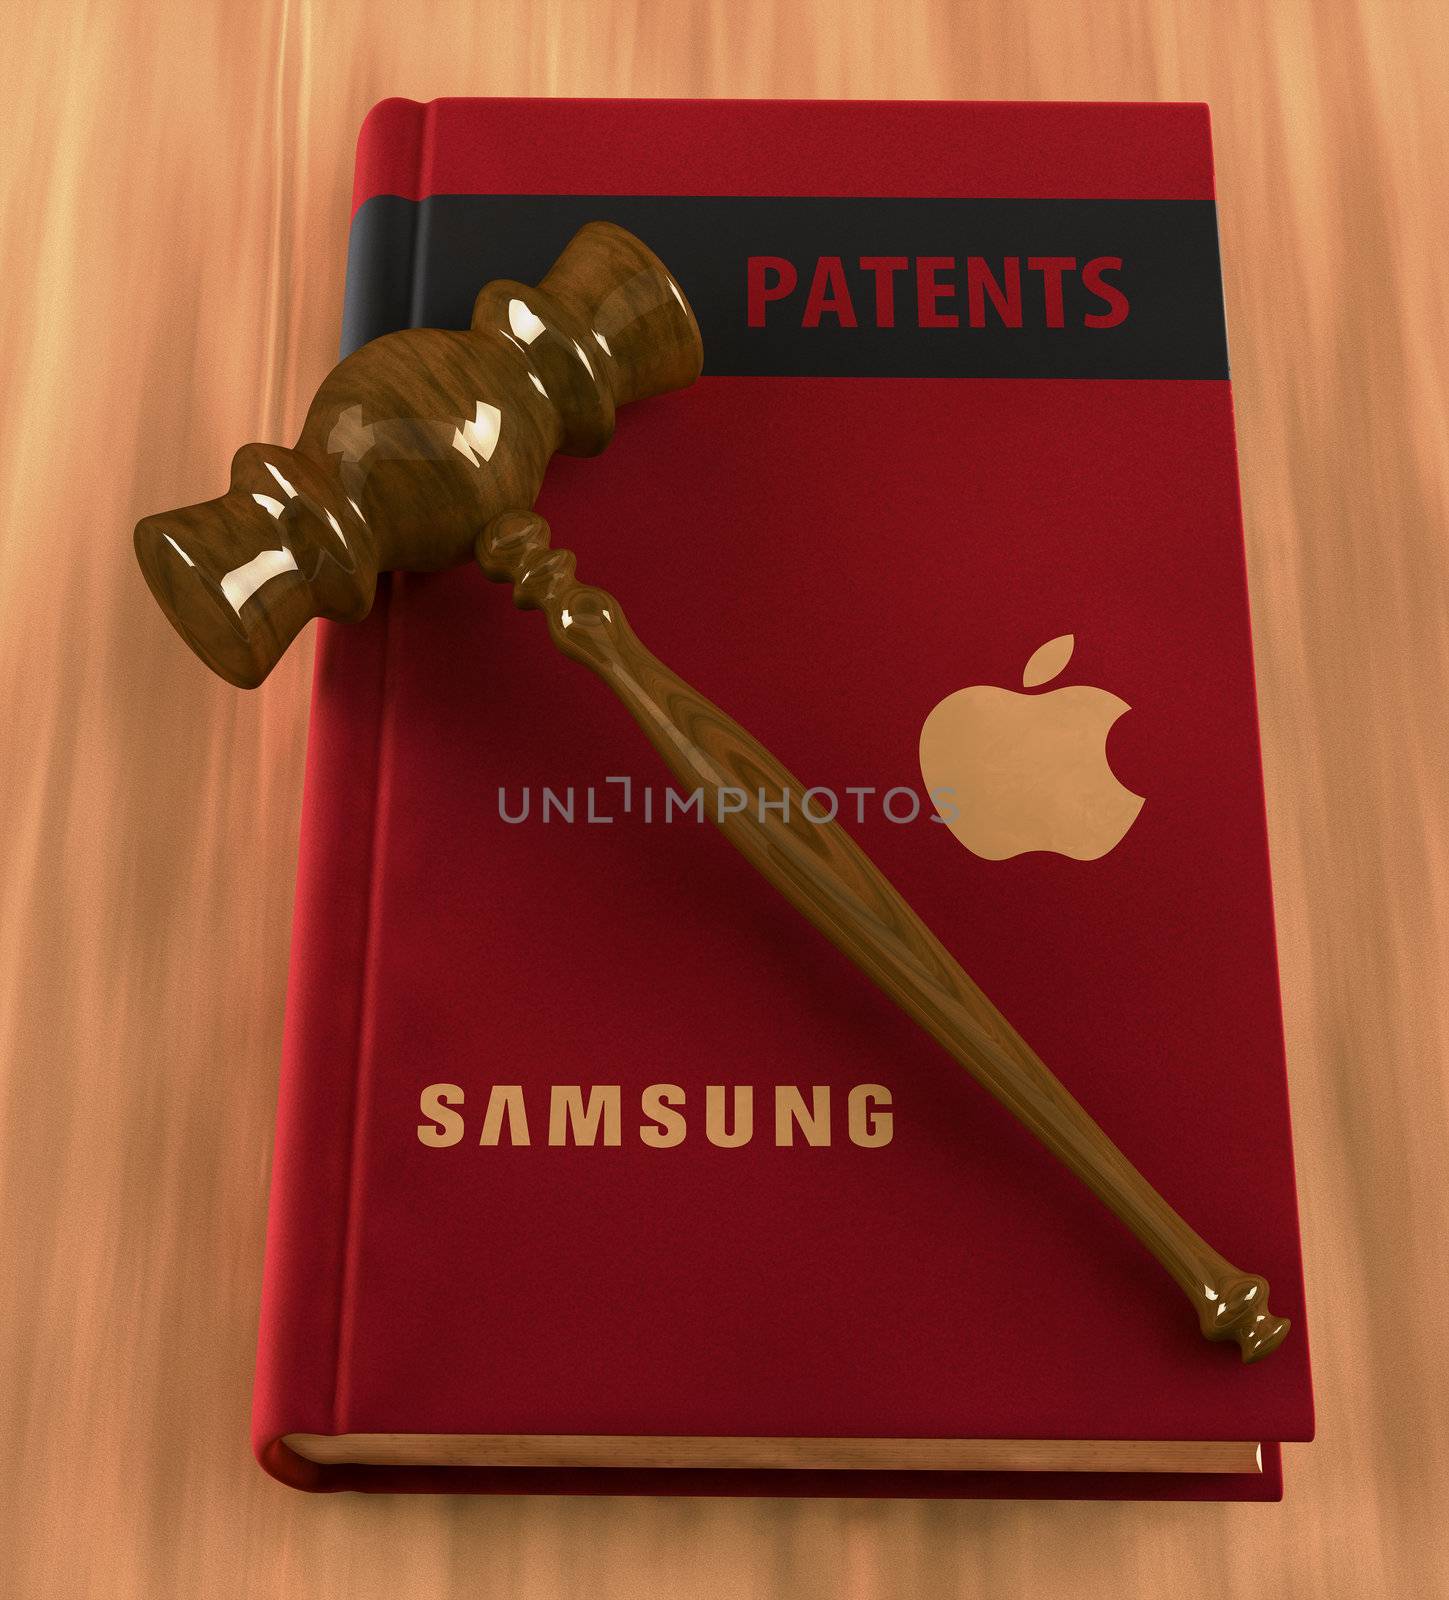 Apple vs Samsung patent war conceptual illustration with gavel on a book